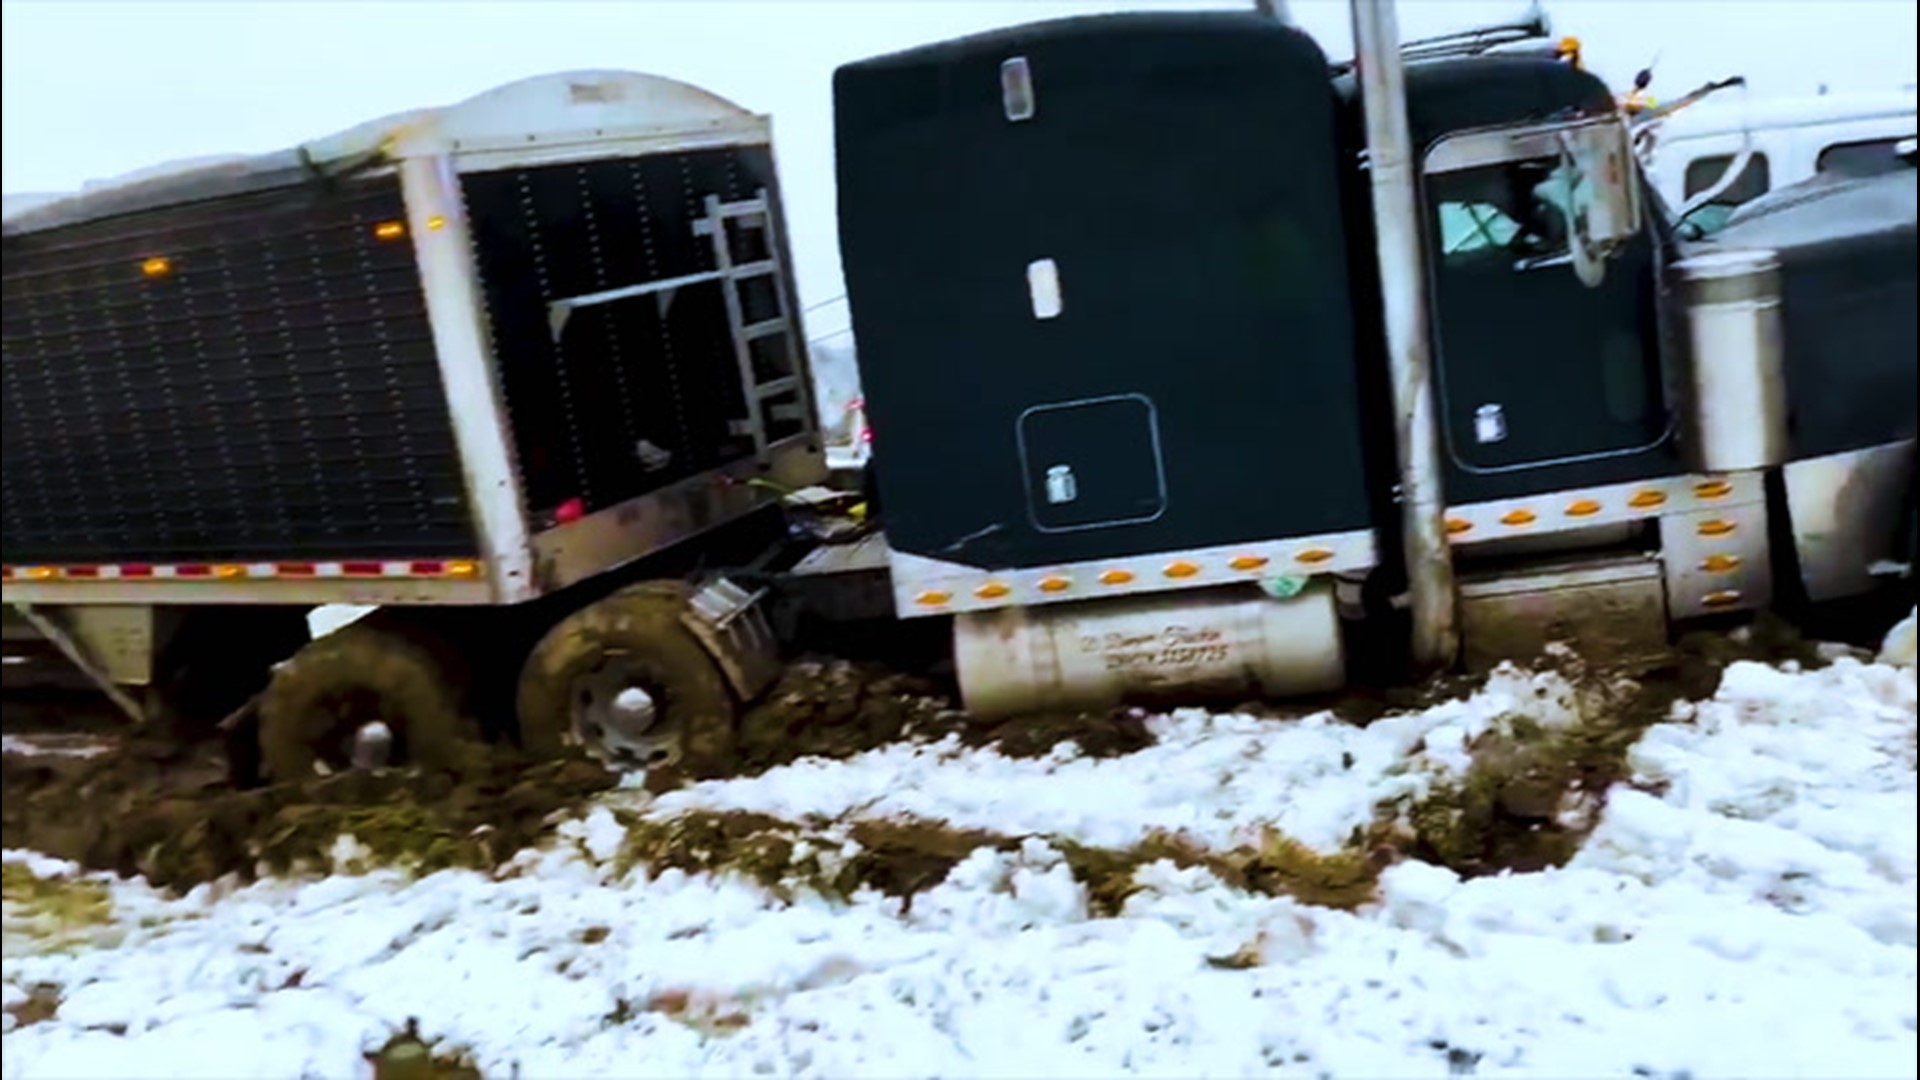 On Jan. 24, a tractor trailer slid off the highway in Jefferson City, Missouri due to slick road conditions.